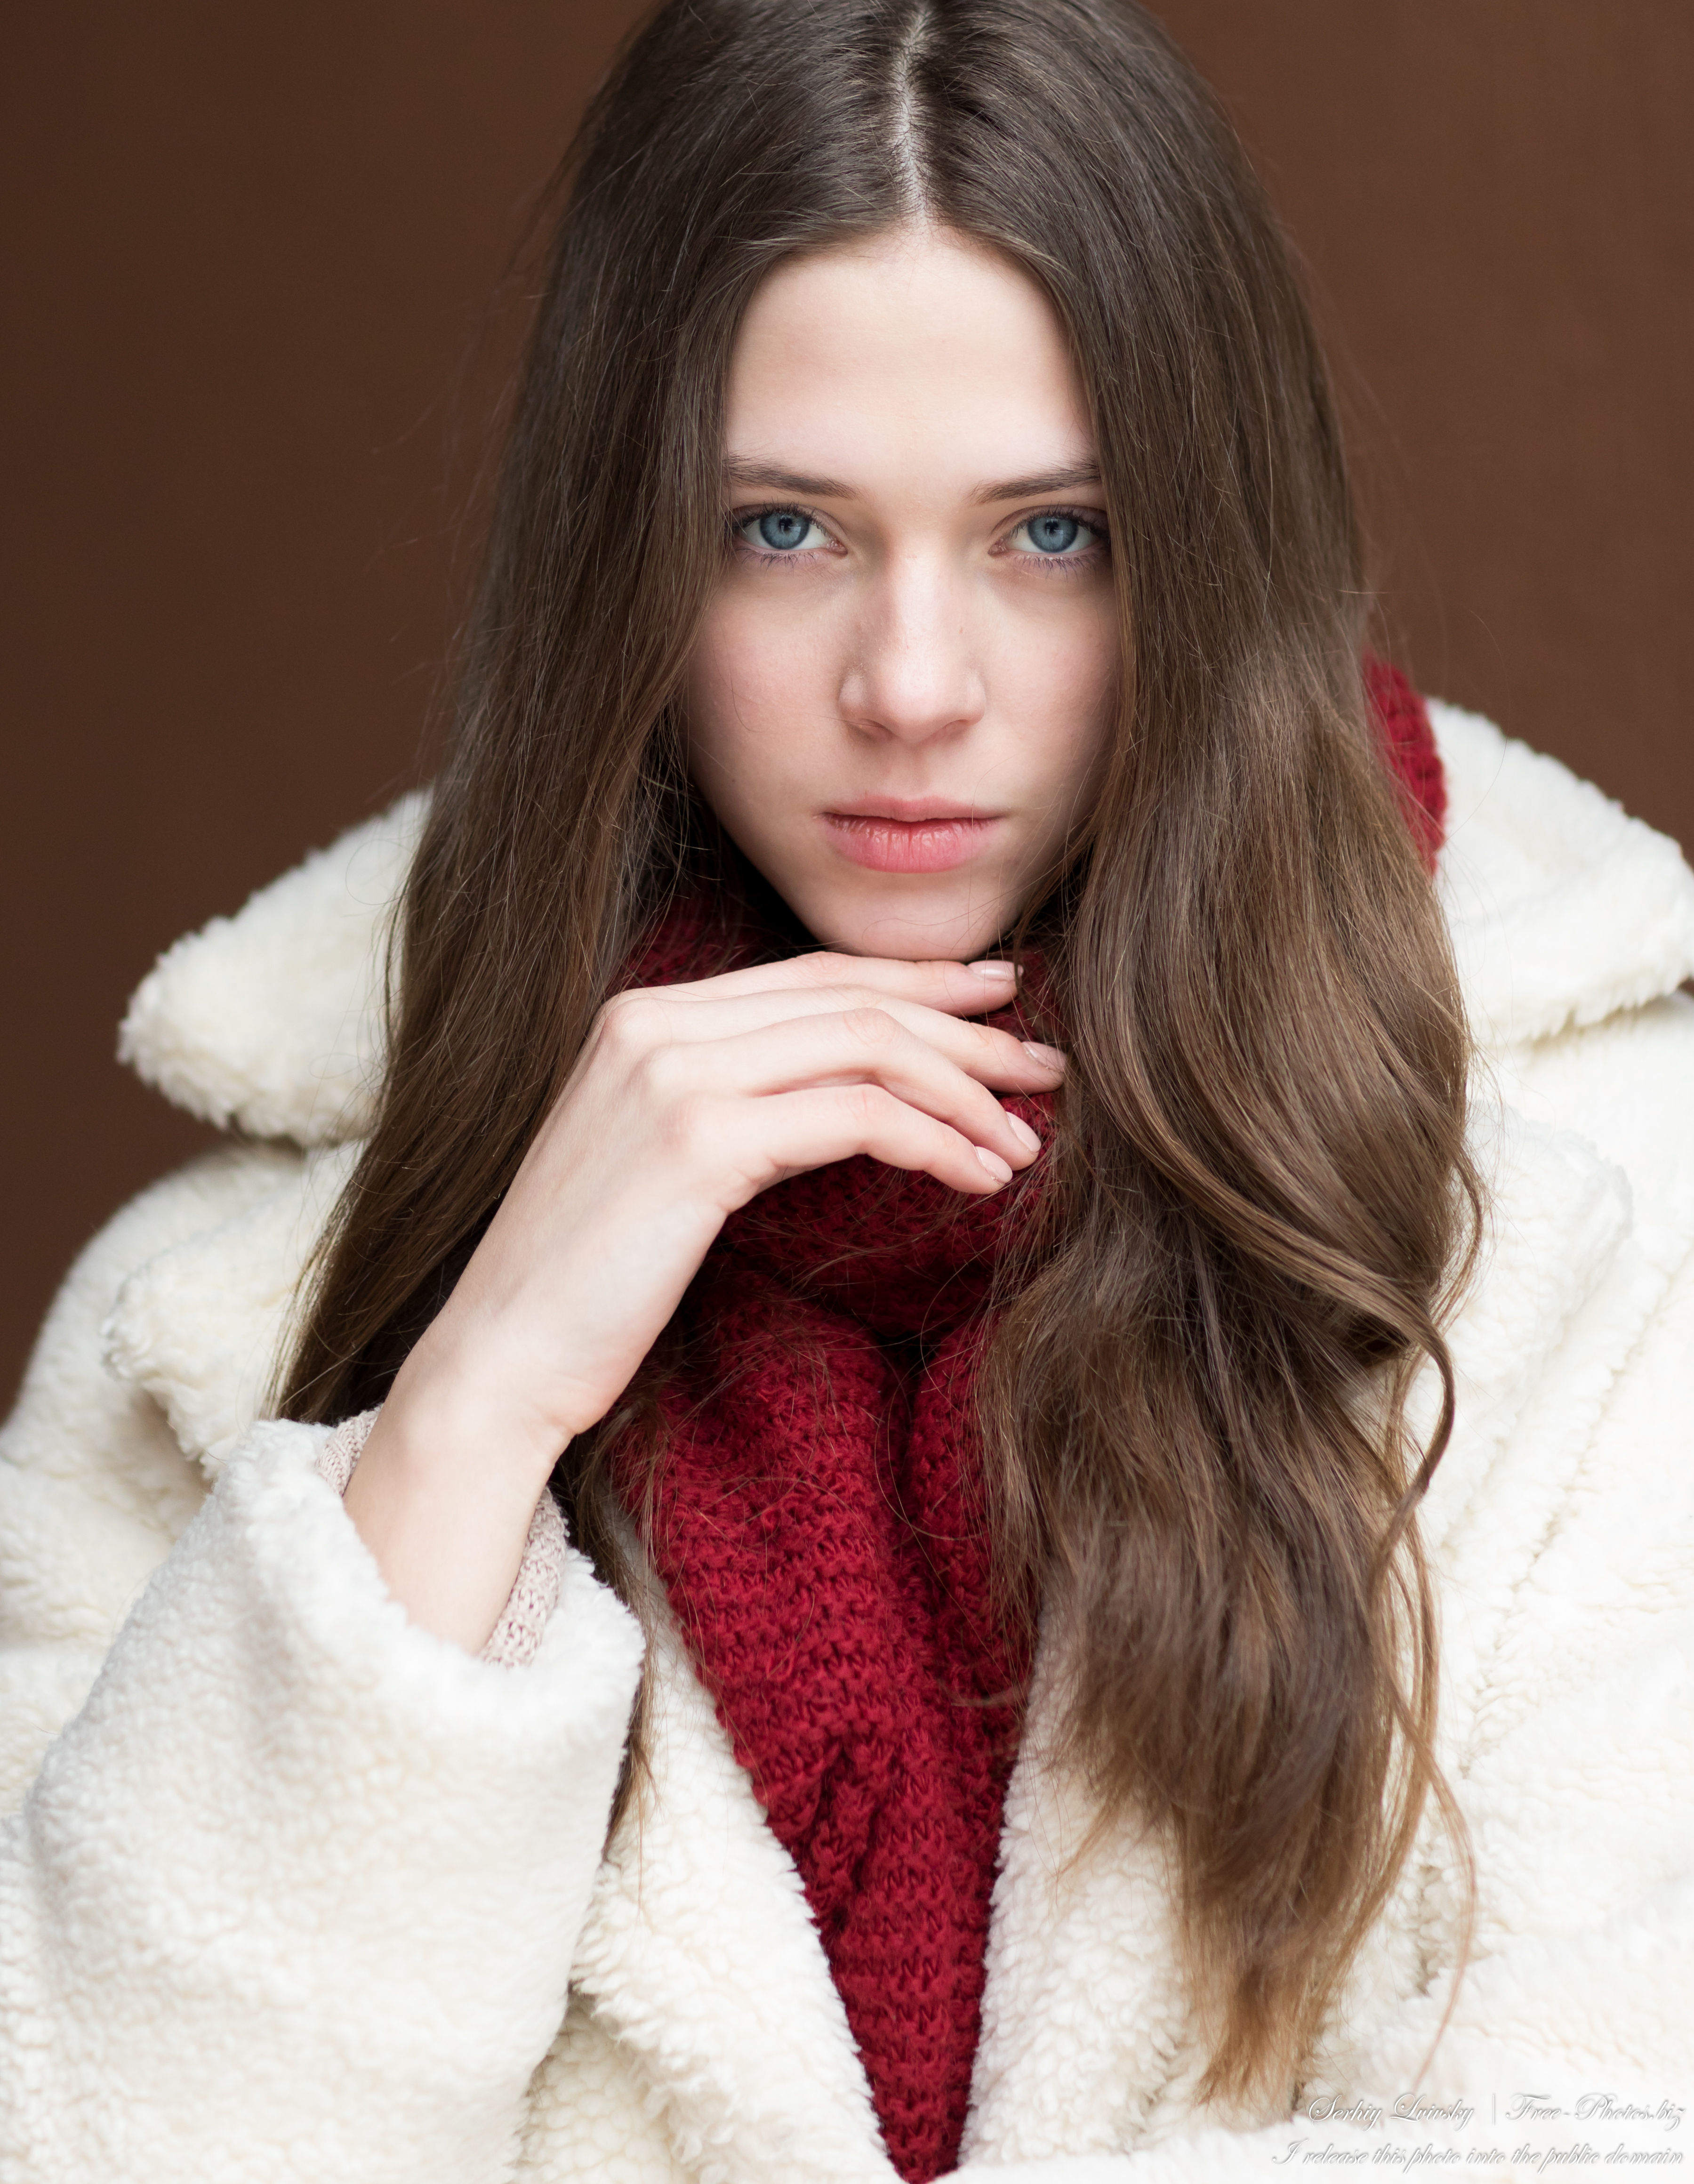 Sophia - a 17-year-old girl with blue eyes photographed by Serhiy Lvivsky in January 2022, picture 1